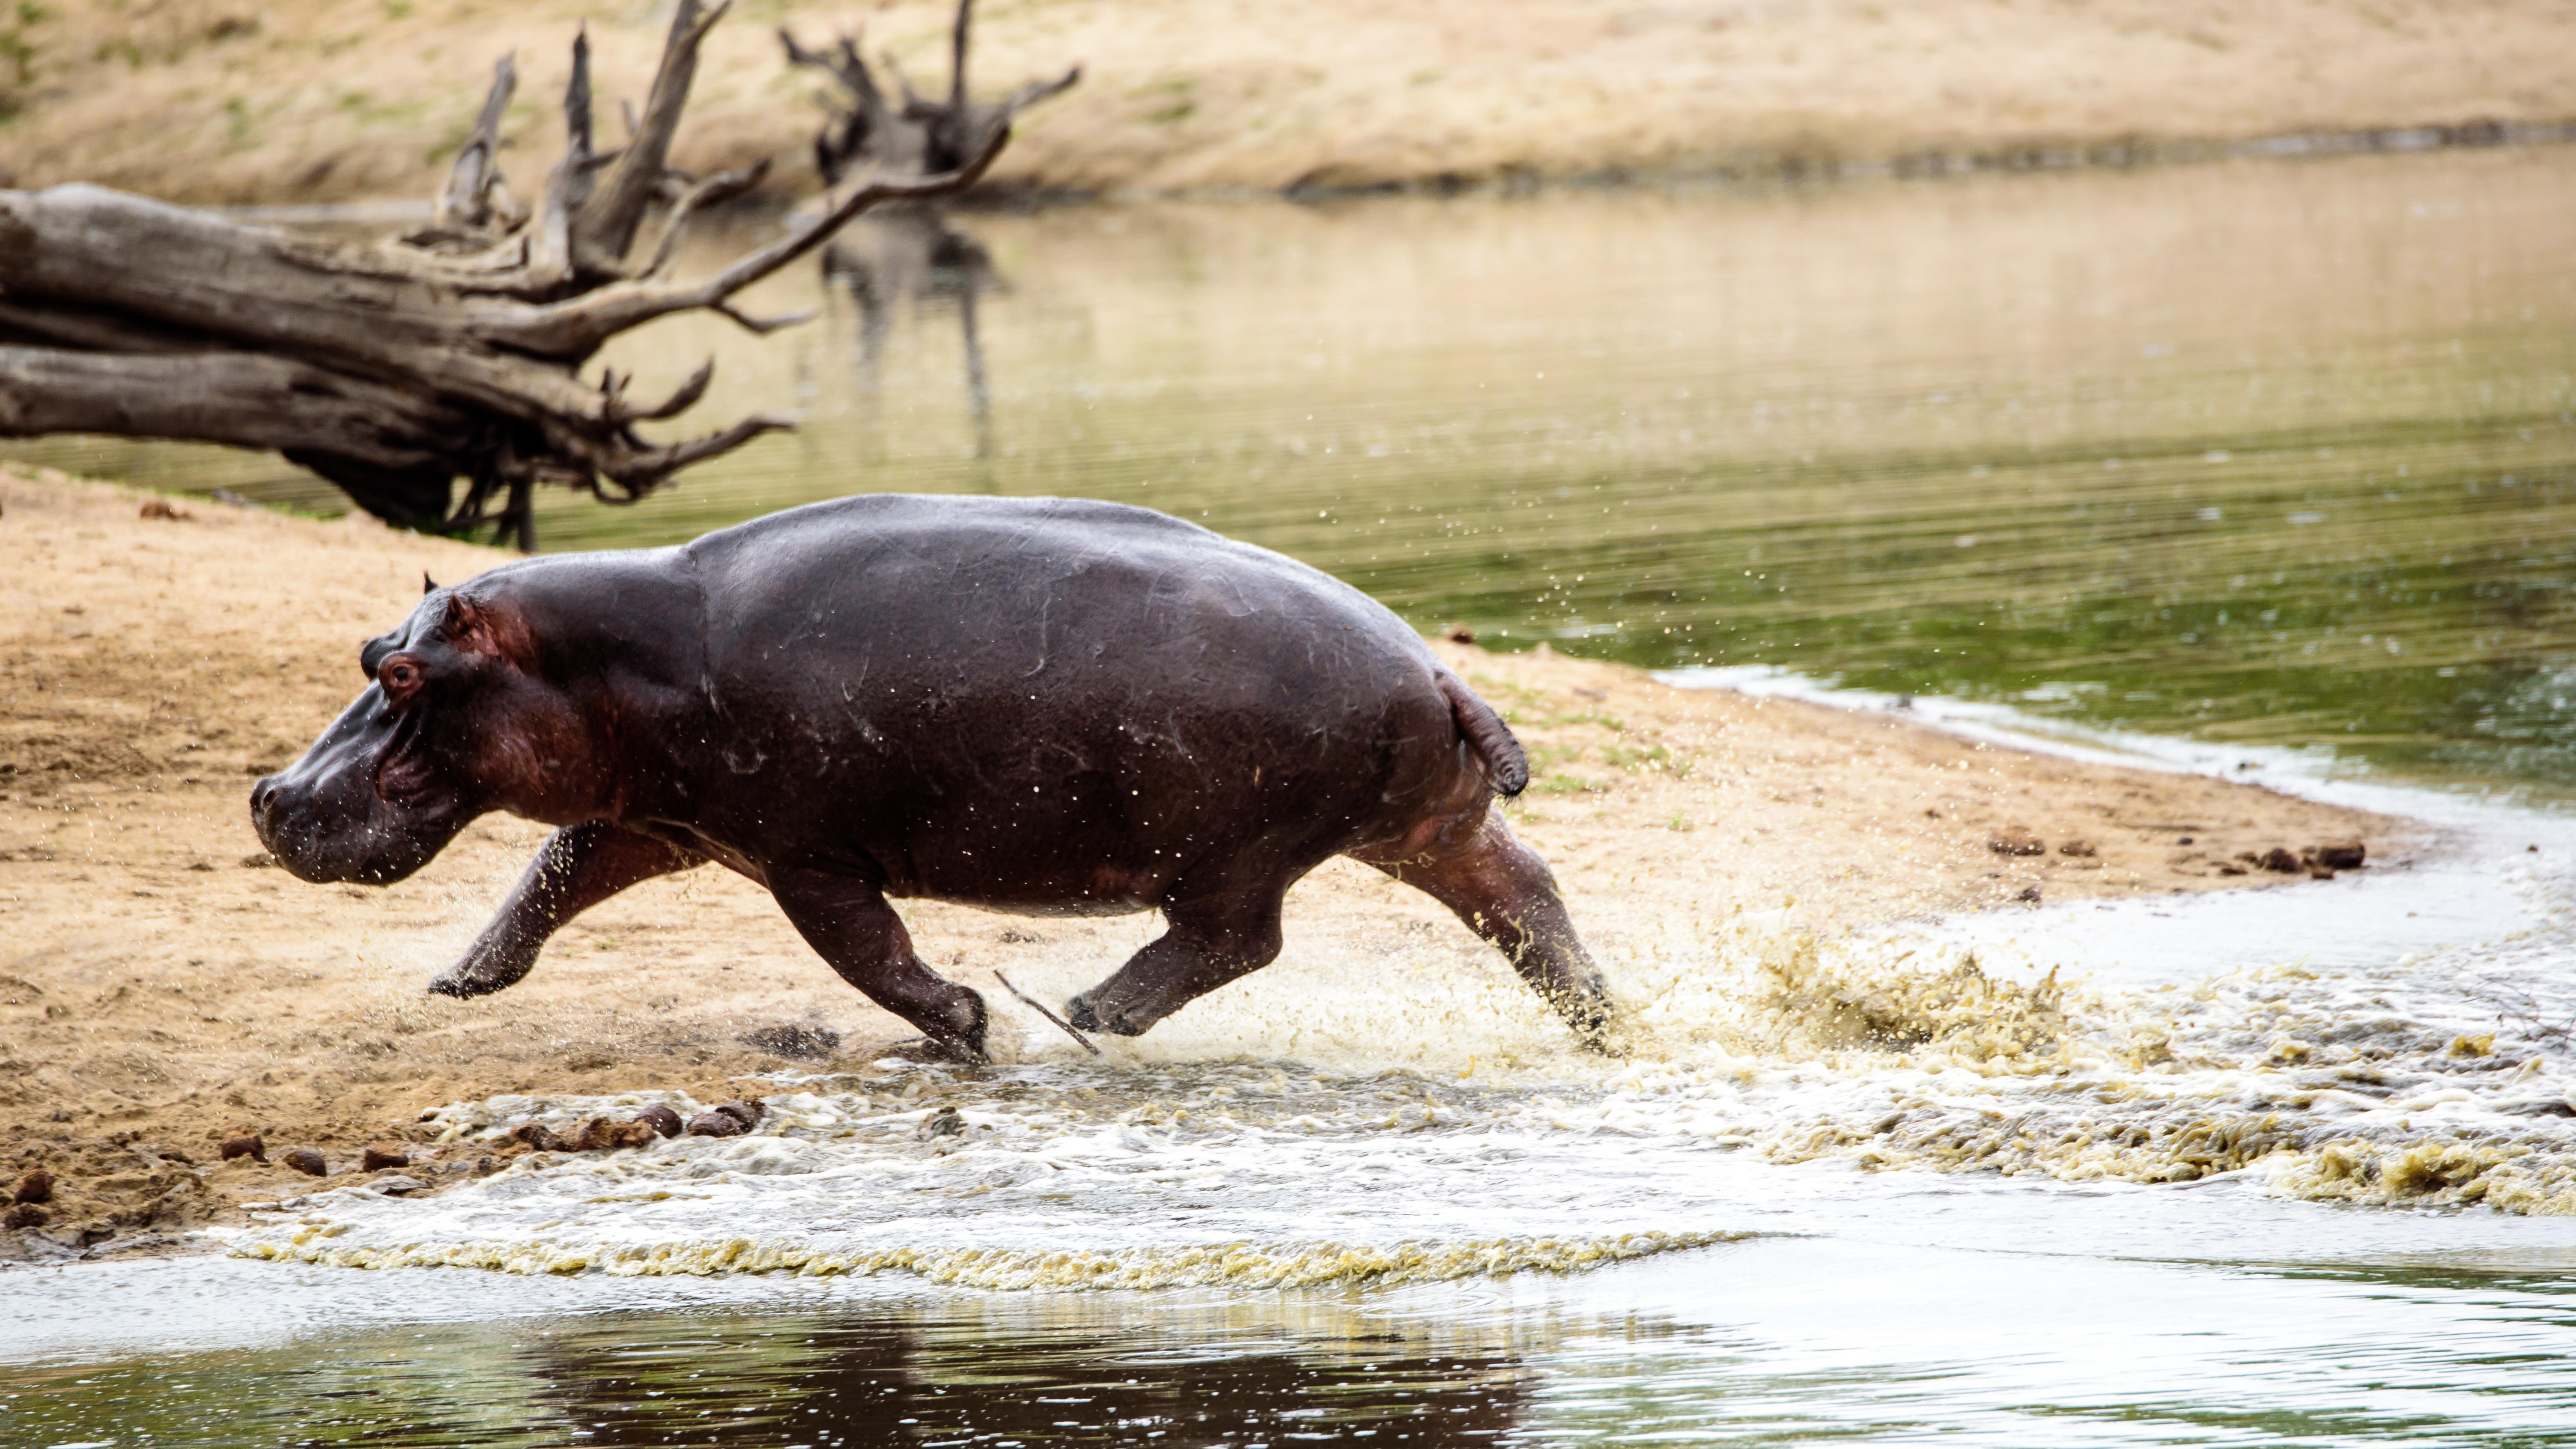  Trotting hippos can 'fly,' but only in 0.3-second bursts, study finds 